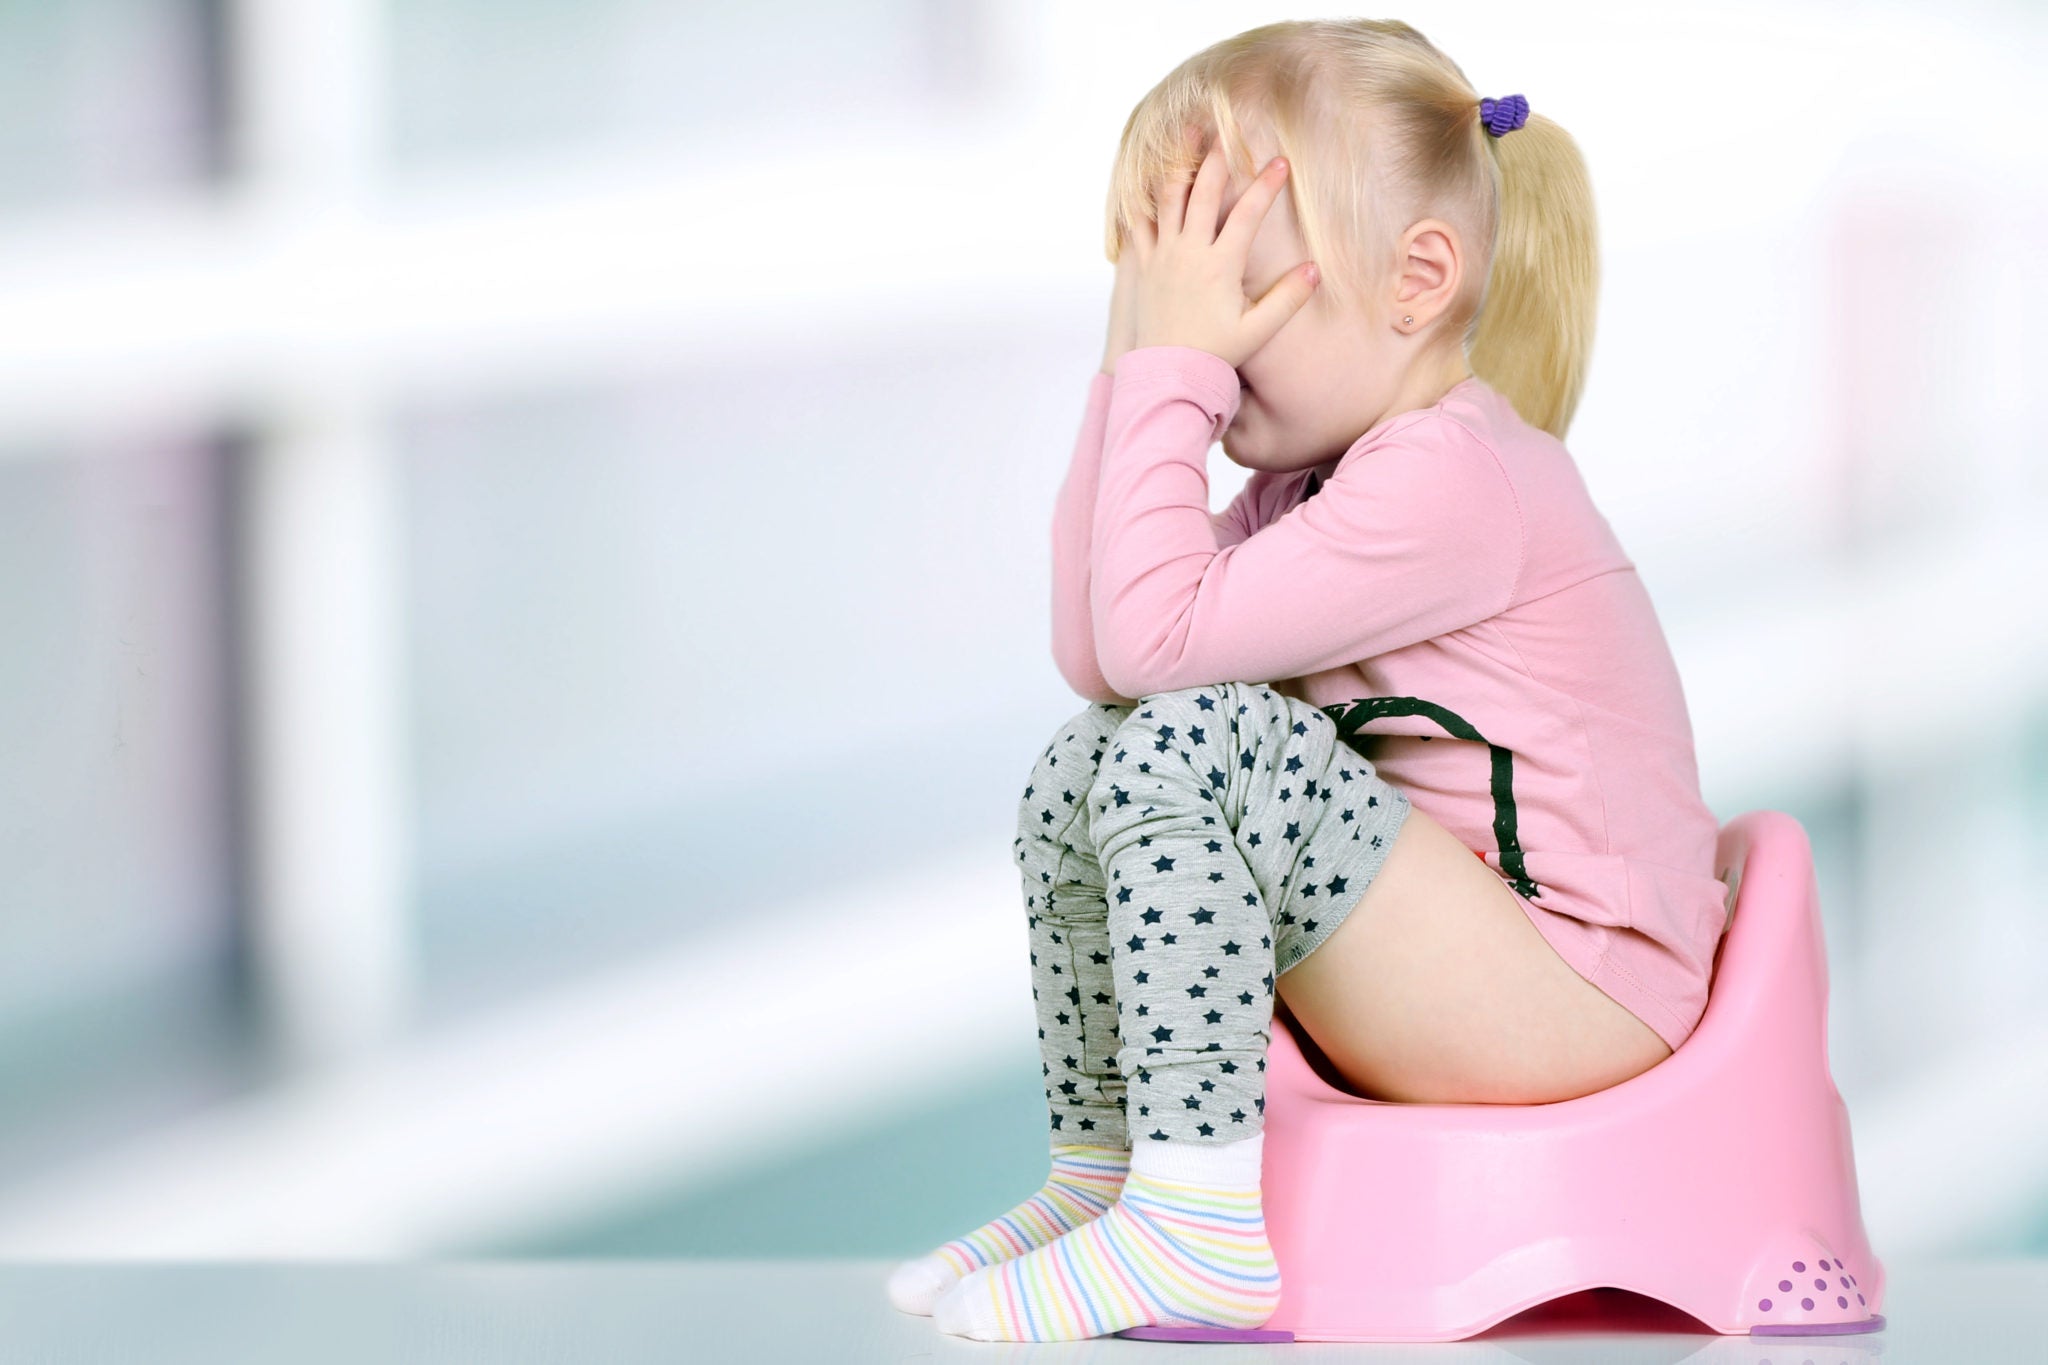 How to Handle a Potty Training Accident – Potty Genius